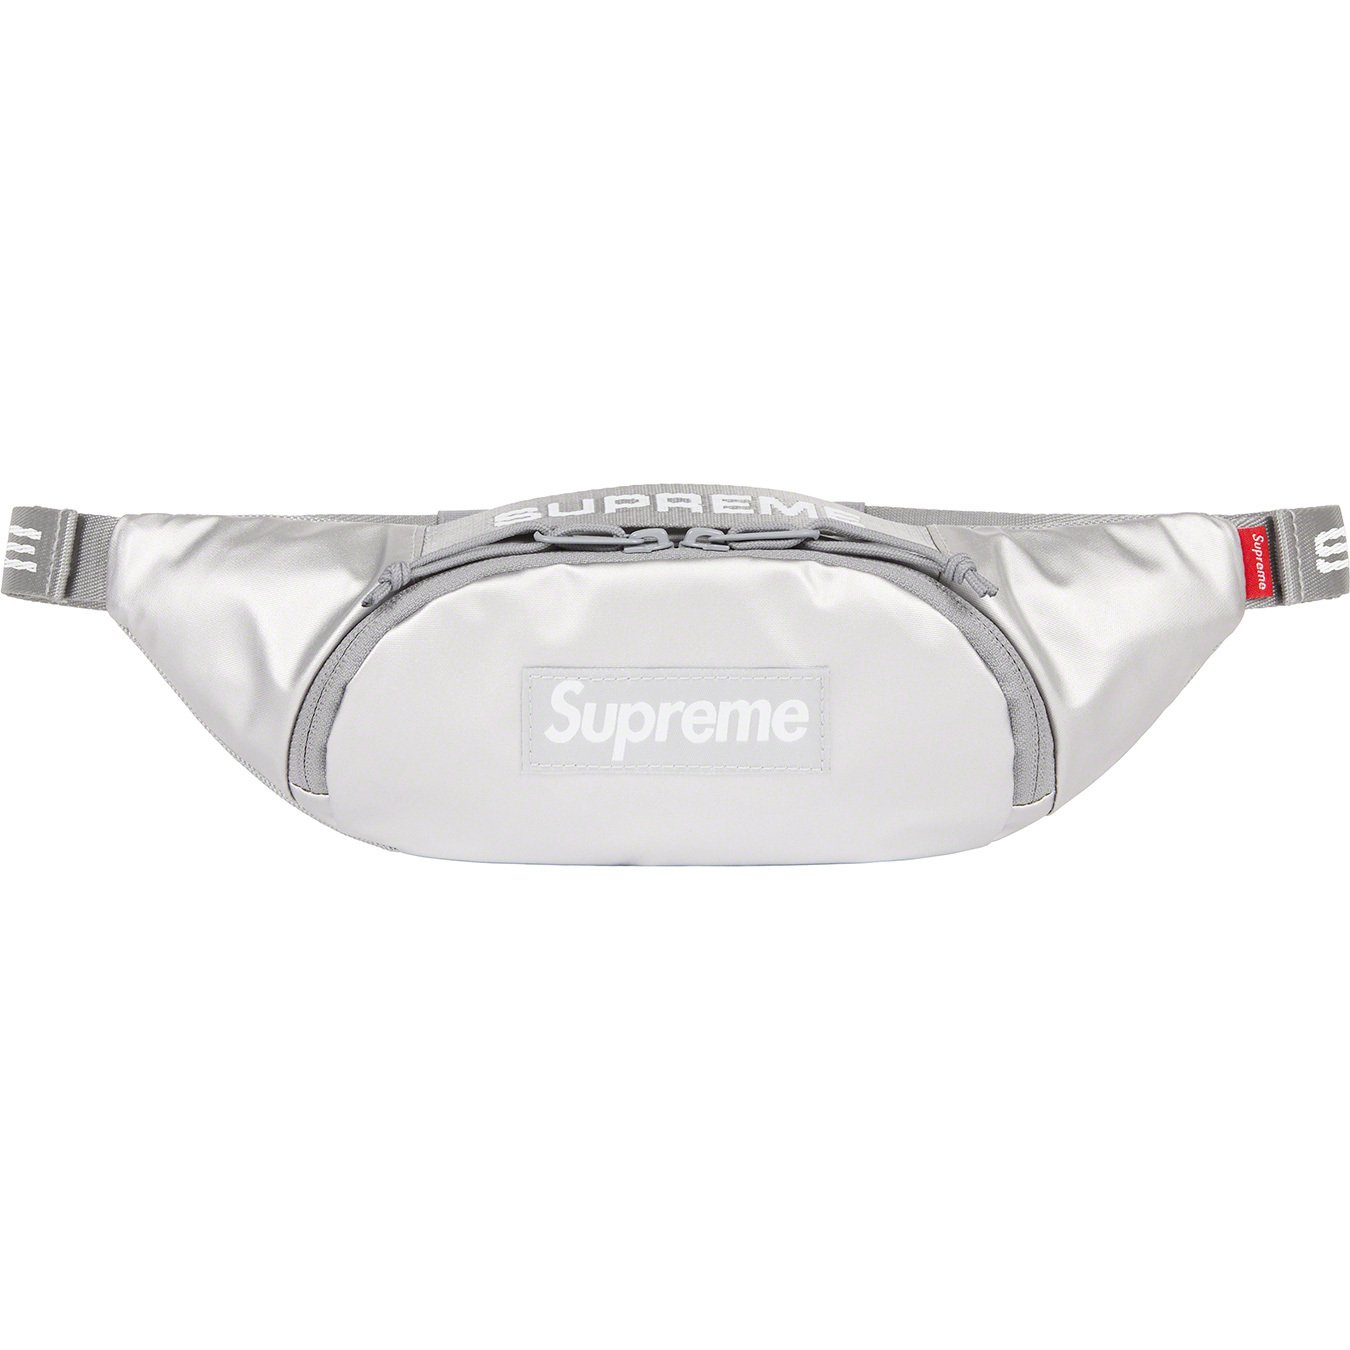 Supreme FW22 Small Waist Bag Red Black Silver $699 Olive $649